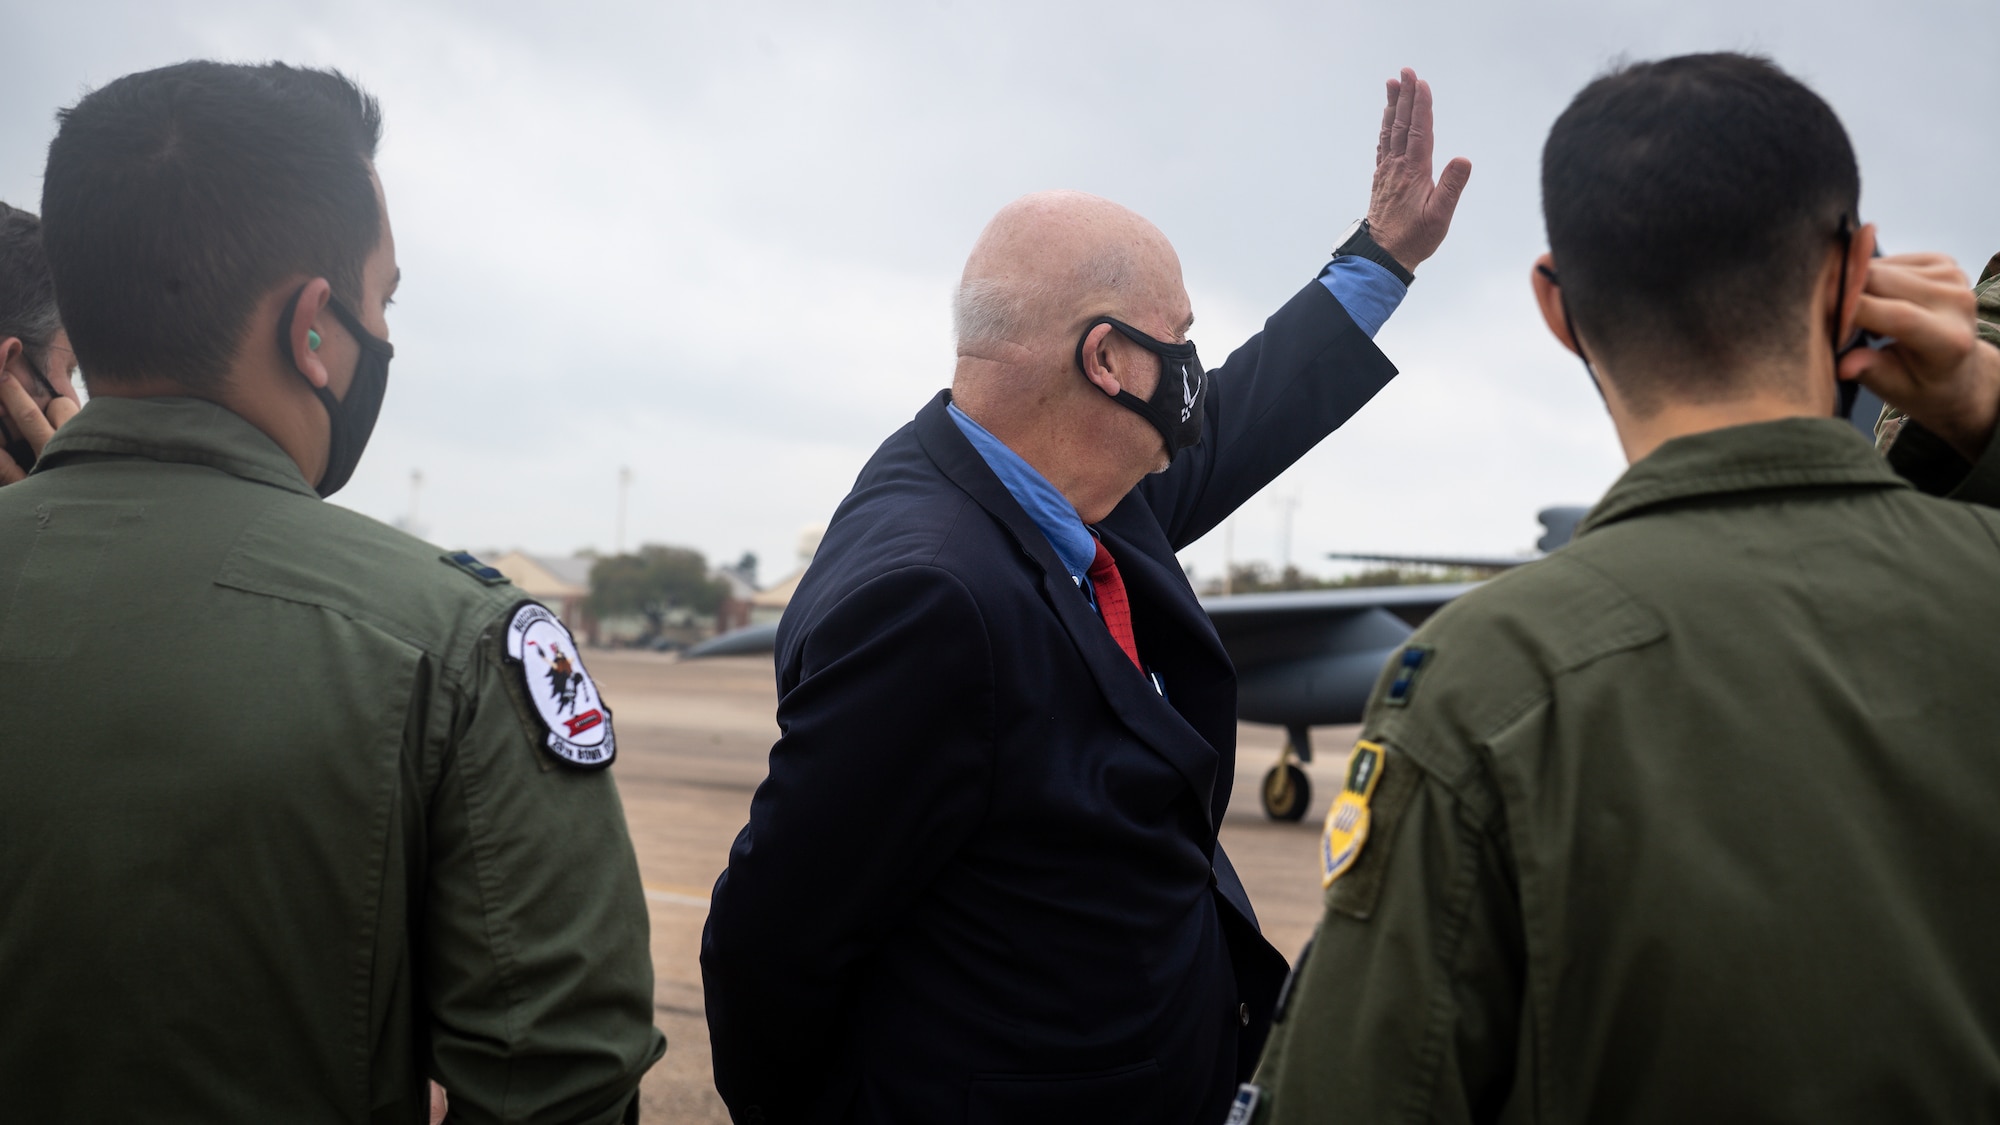 Honorable John P. Roth, acting Secretary of the Air Force, waves at a passing B-52H Stratofortress during a tour at Barksdale Air Force Base, Louisiana, April 6, 2021. The tour consisted of a B-52 with briefings from weapons load crew, crew chiefs and air crew. (U.S. Air Force photo by Senior Airman Max Miller)